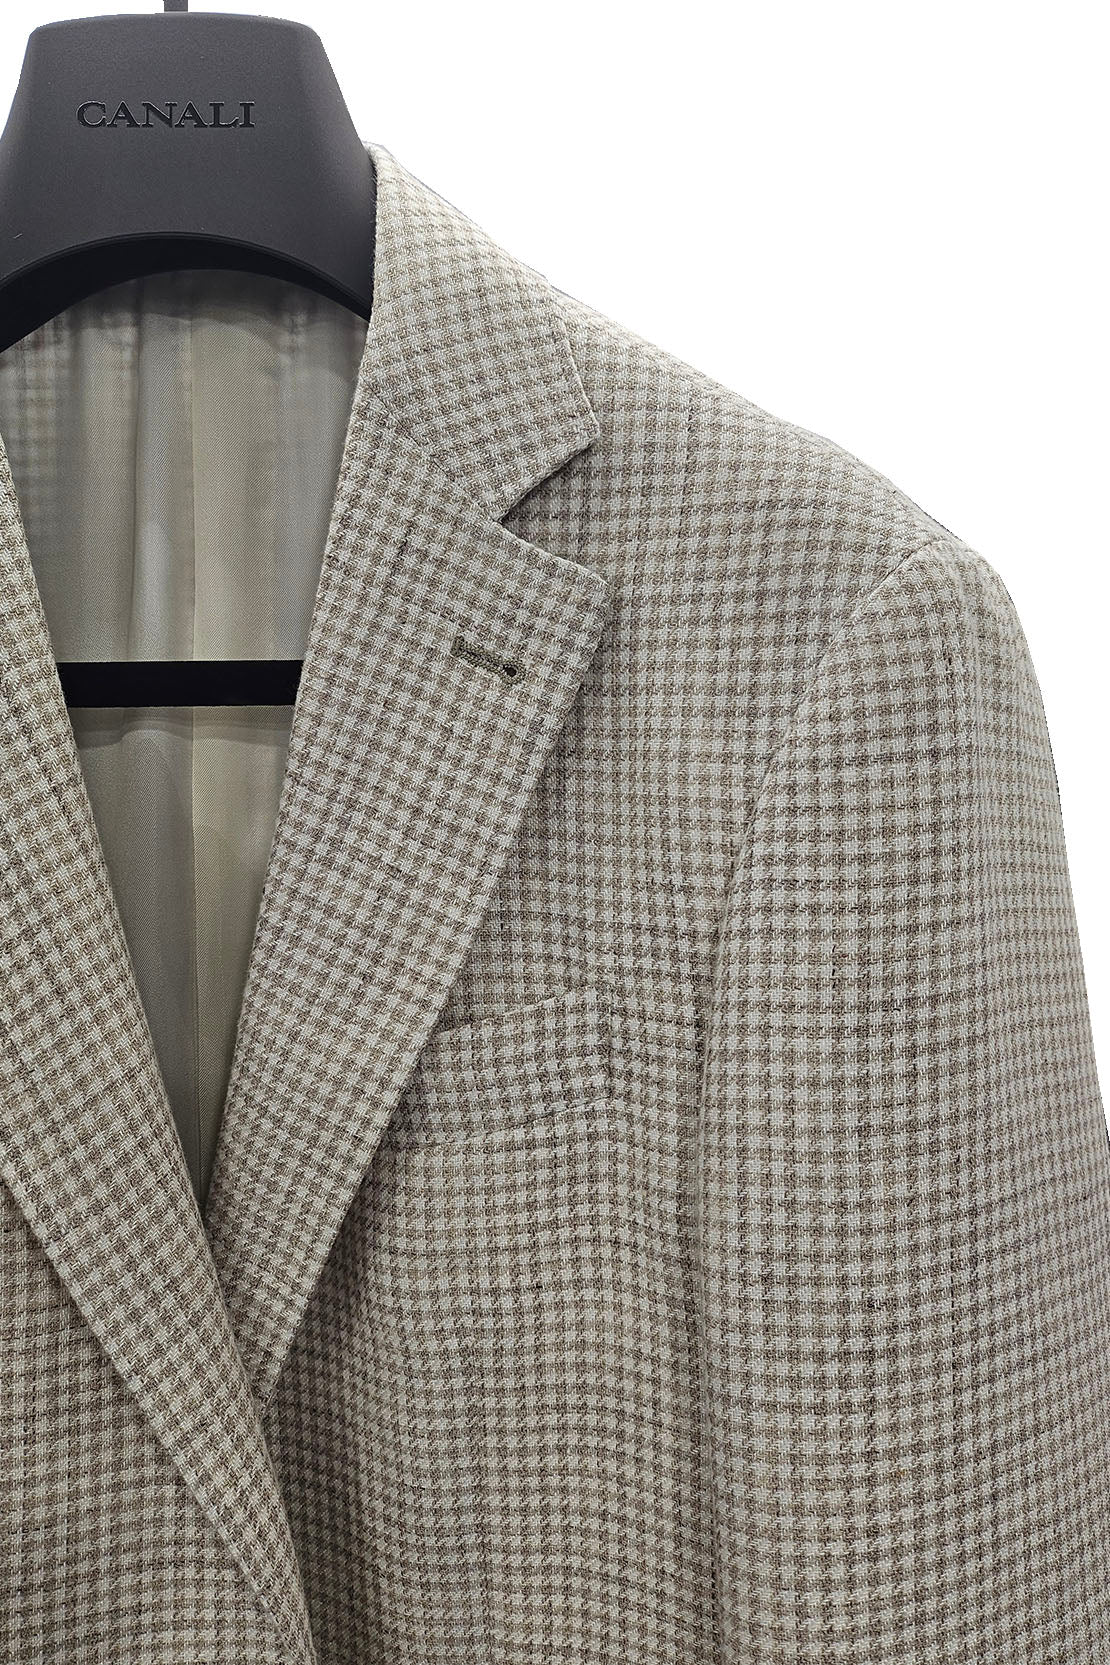 CANALI - Beige and Sand Houndstooth Linen and Wool KEI 2 Button Jacket 13275-CF02002.701